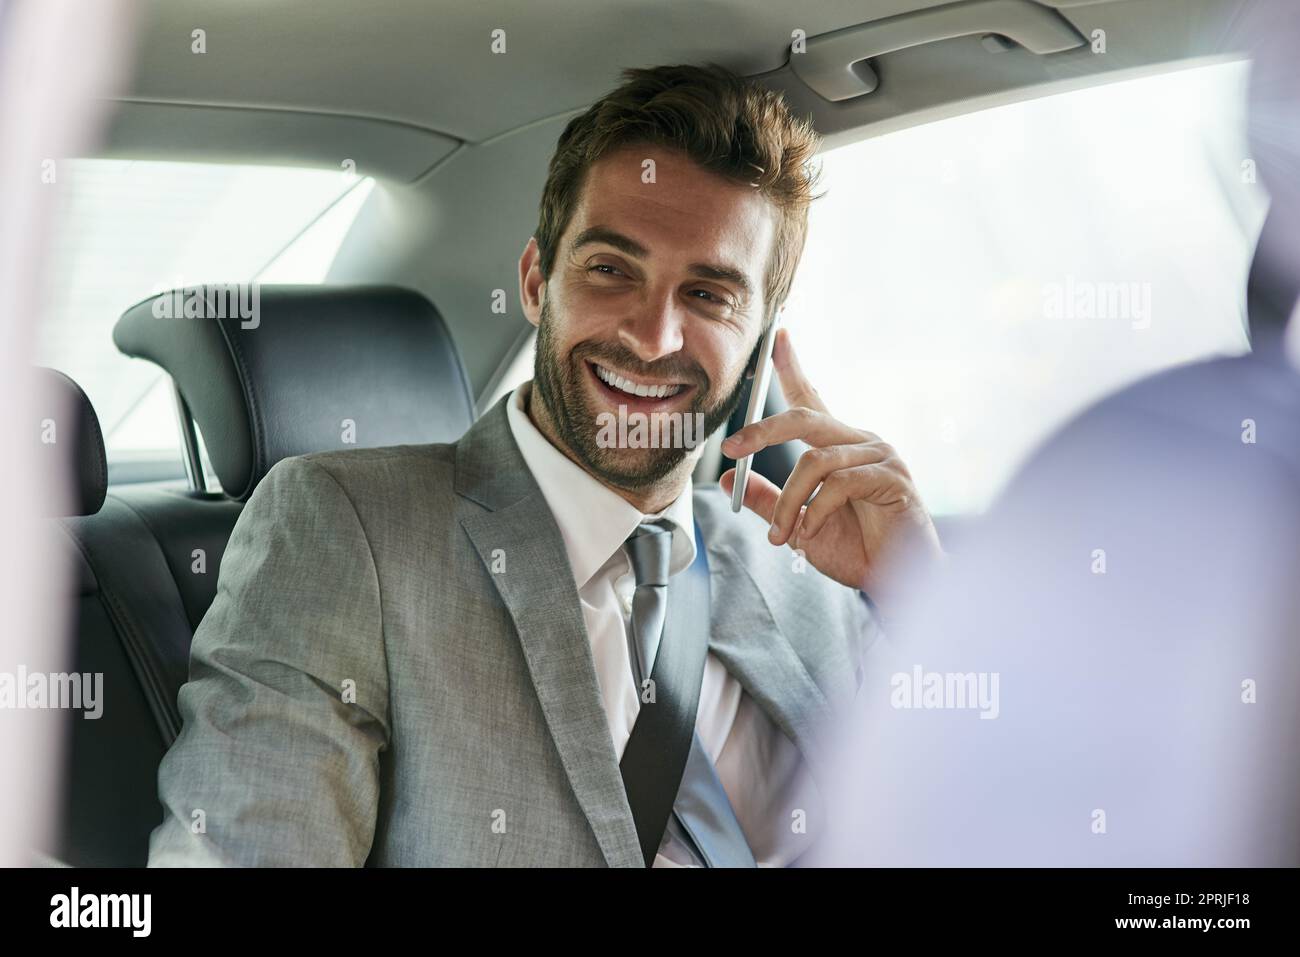 Traveling in business style. a handsome young businessman talking on a cellphone in the back seat of a car. Stock Photo